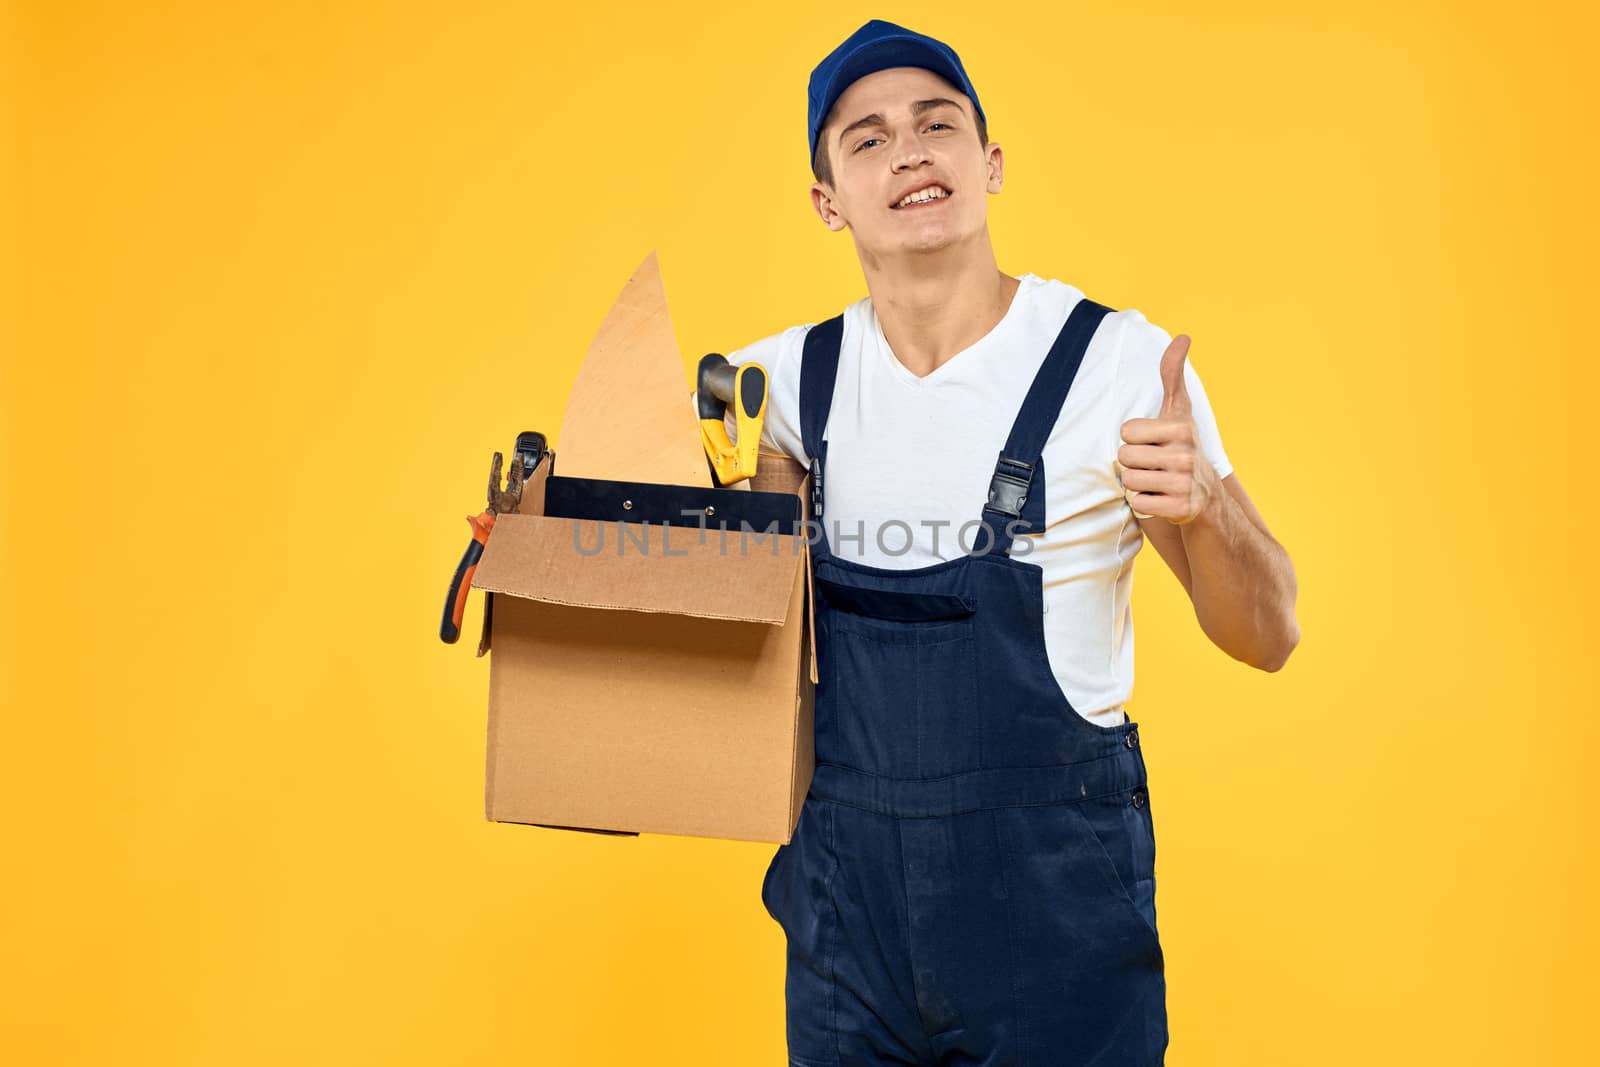 worker with box in hand tools loader yellow background by SHOTPRIME